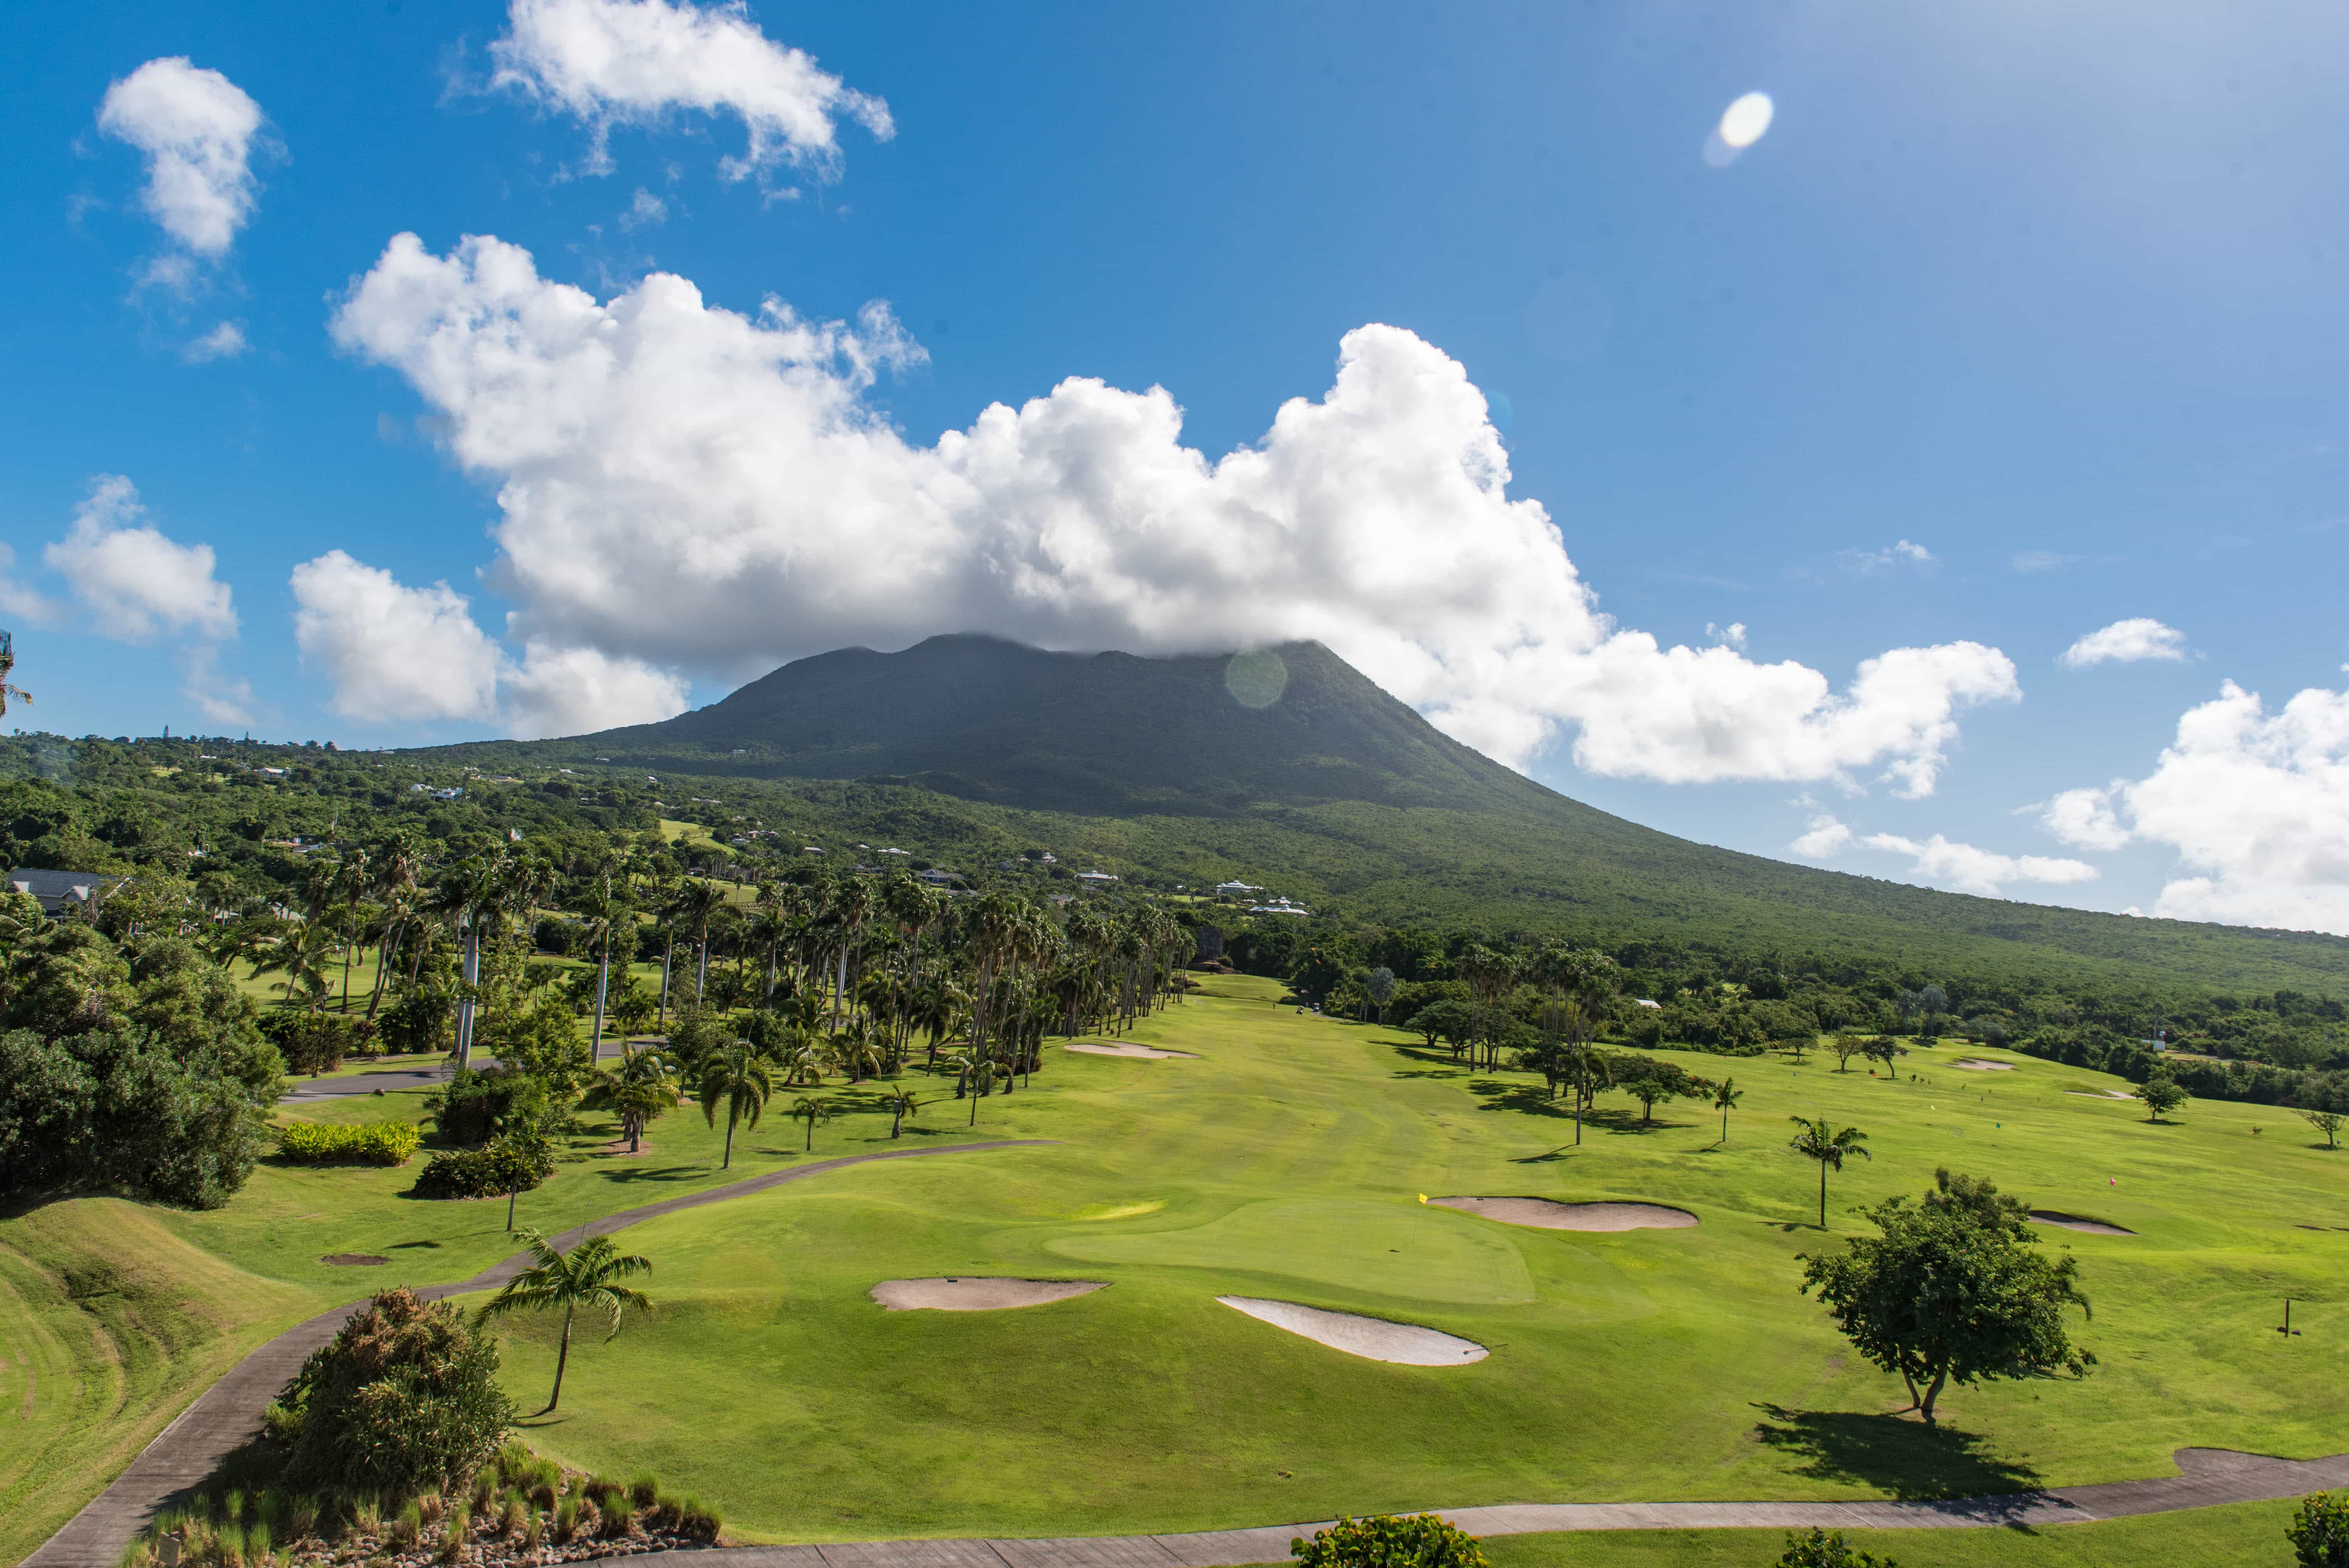 If golf is your thing, how about playing in the shadow of this volcano?